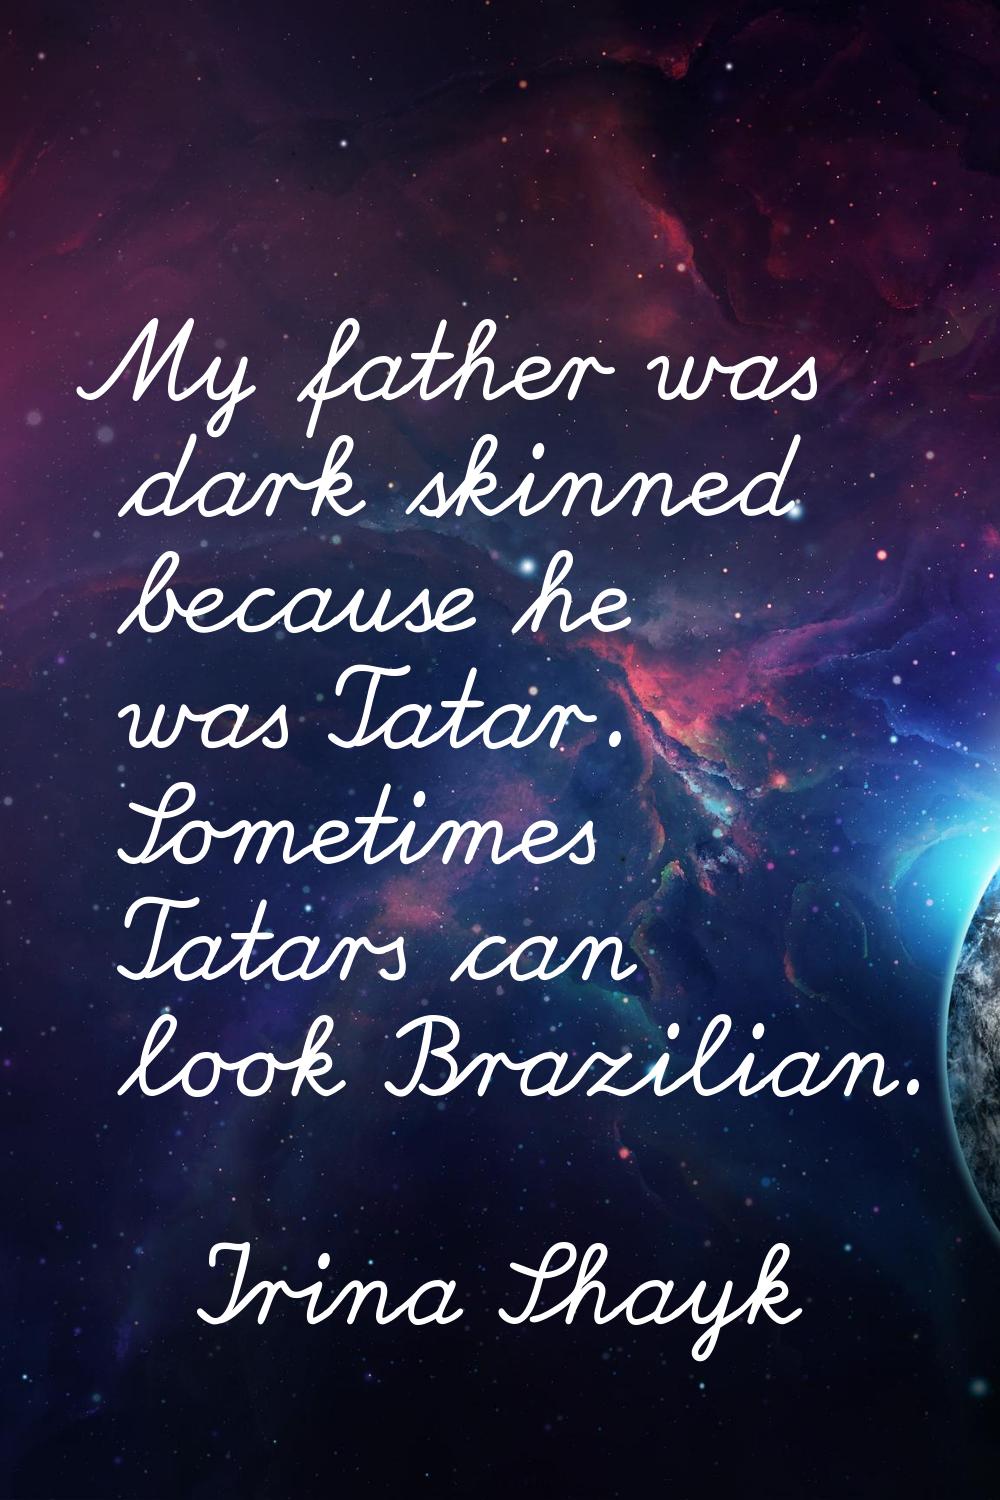 My father was dark skinned because he was Tatar. Sometimes Tatars can look Brazilian.